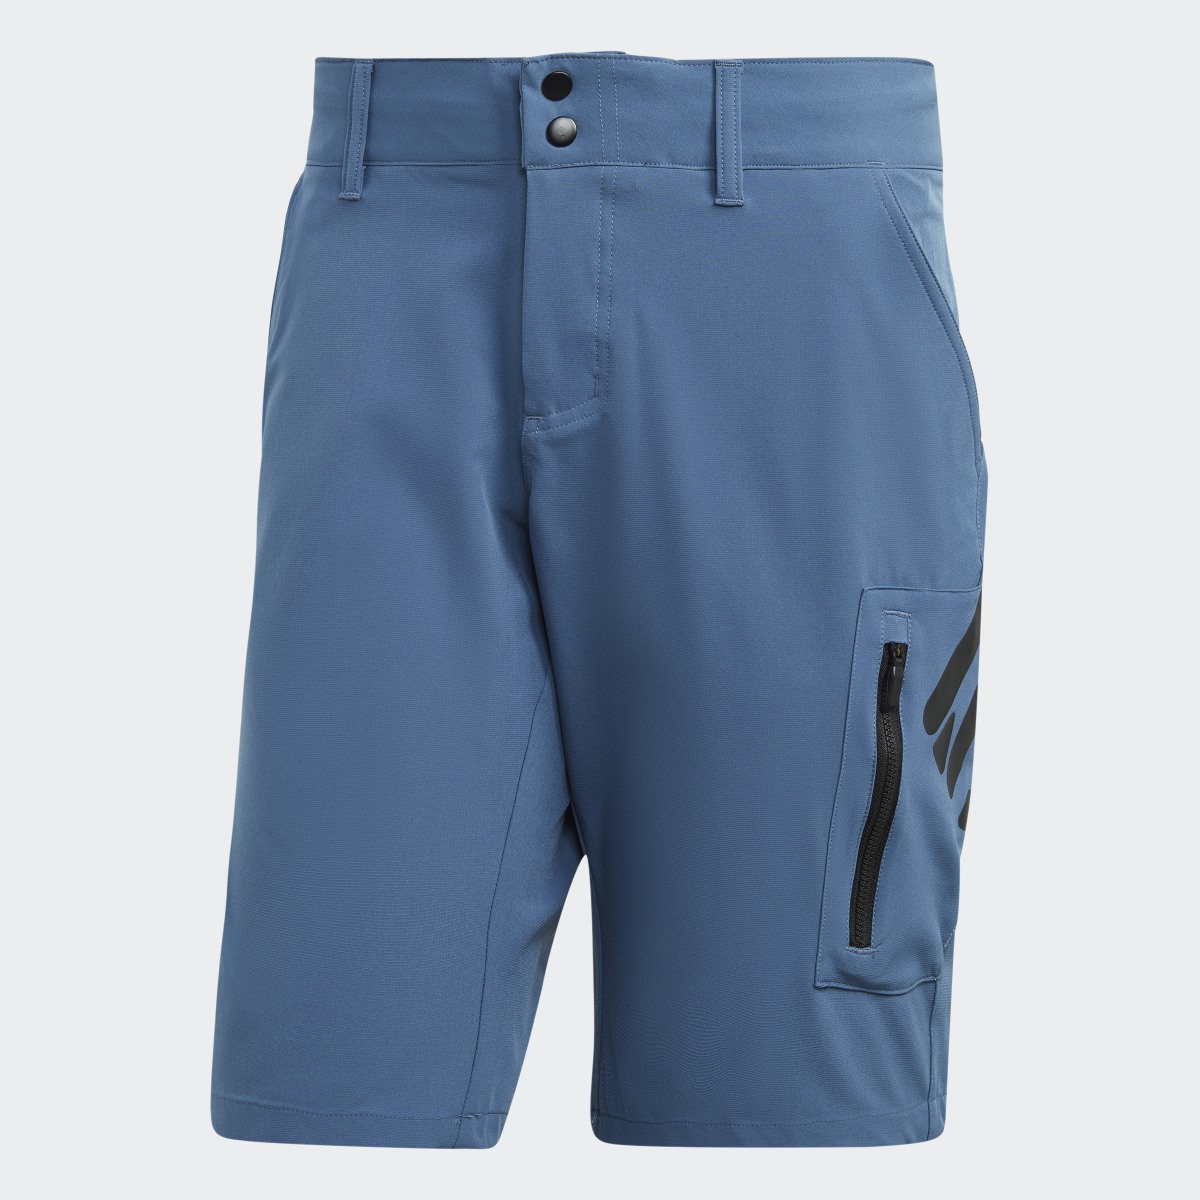 Adidas Five Ten Brand of the Brave Shorts. 5